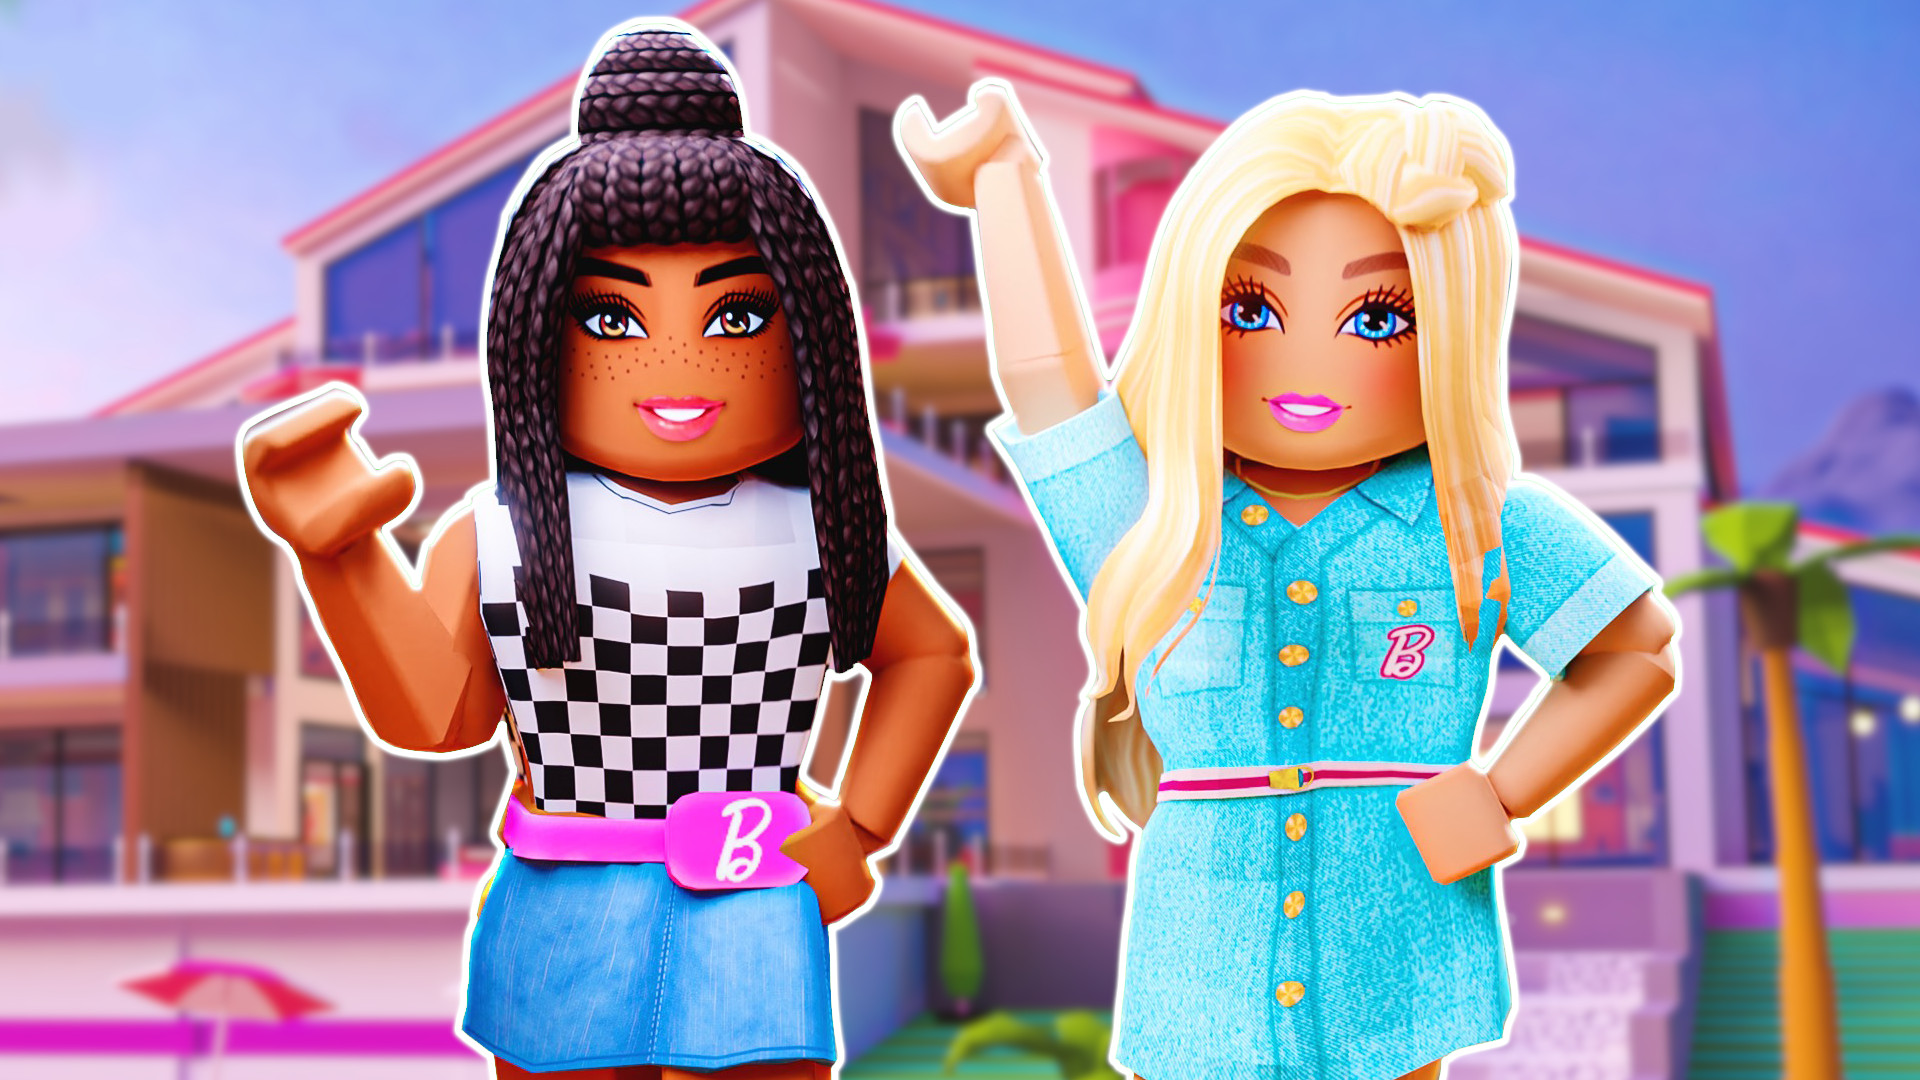 Barbie's Next Frontier: Mattel Teams Up with Rollic for an All-Inclusive 'Mass-Market' Mobile Game Experience